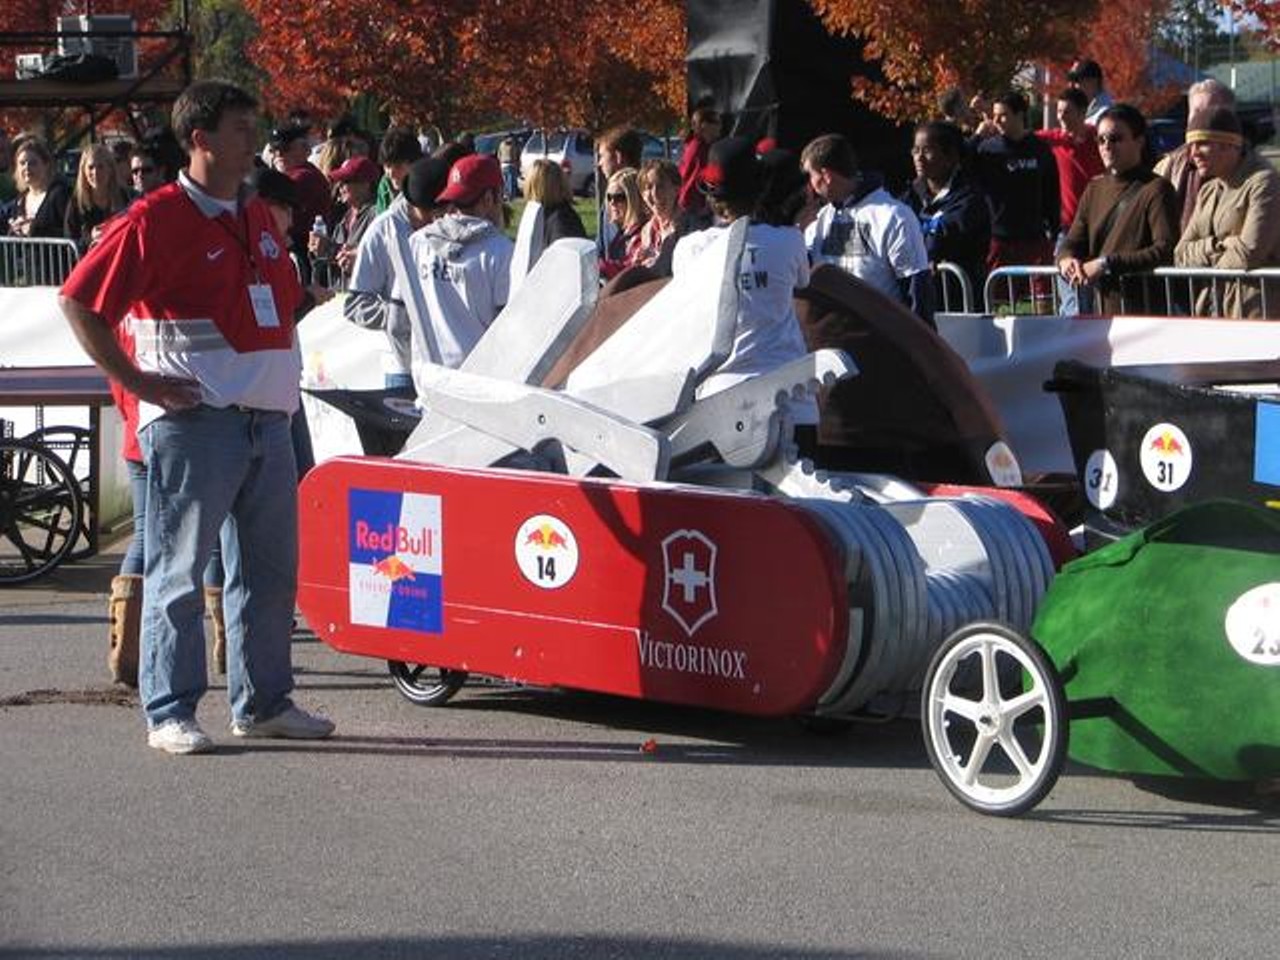 Red Bull Soap Box Derby